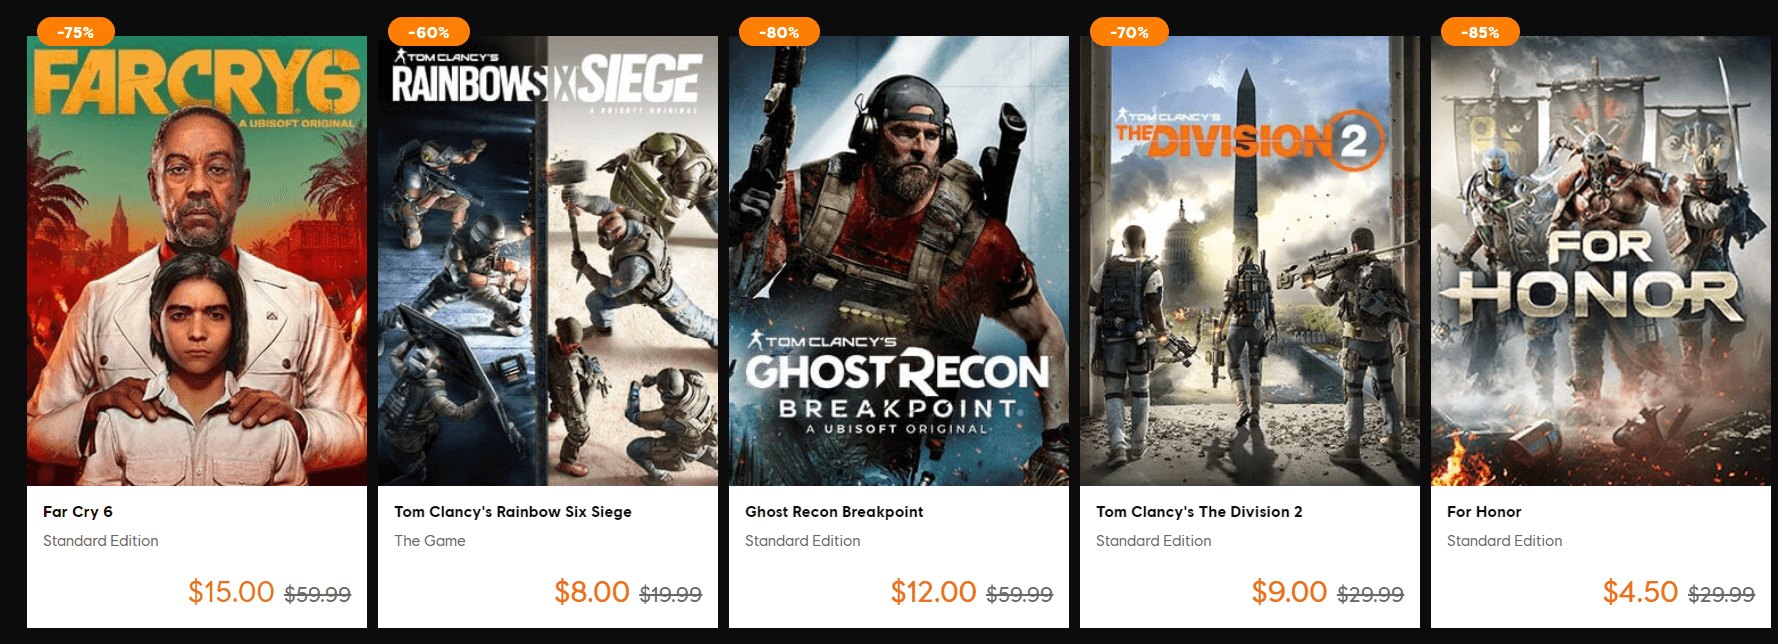 Some of the Best Titles on the Ubisoft Bargain Bin Sale